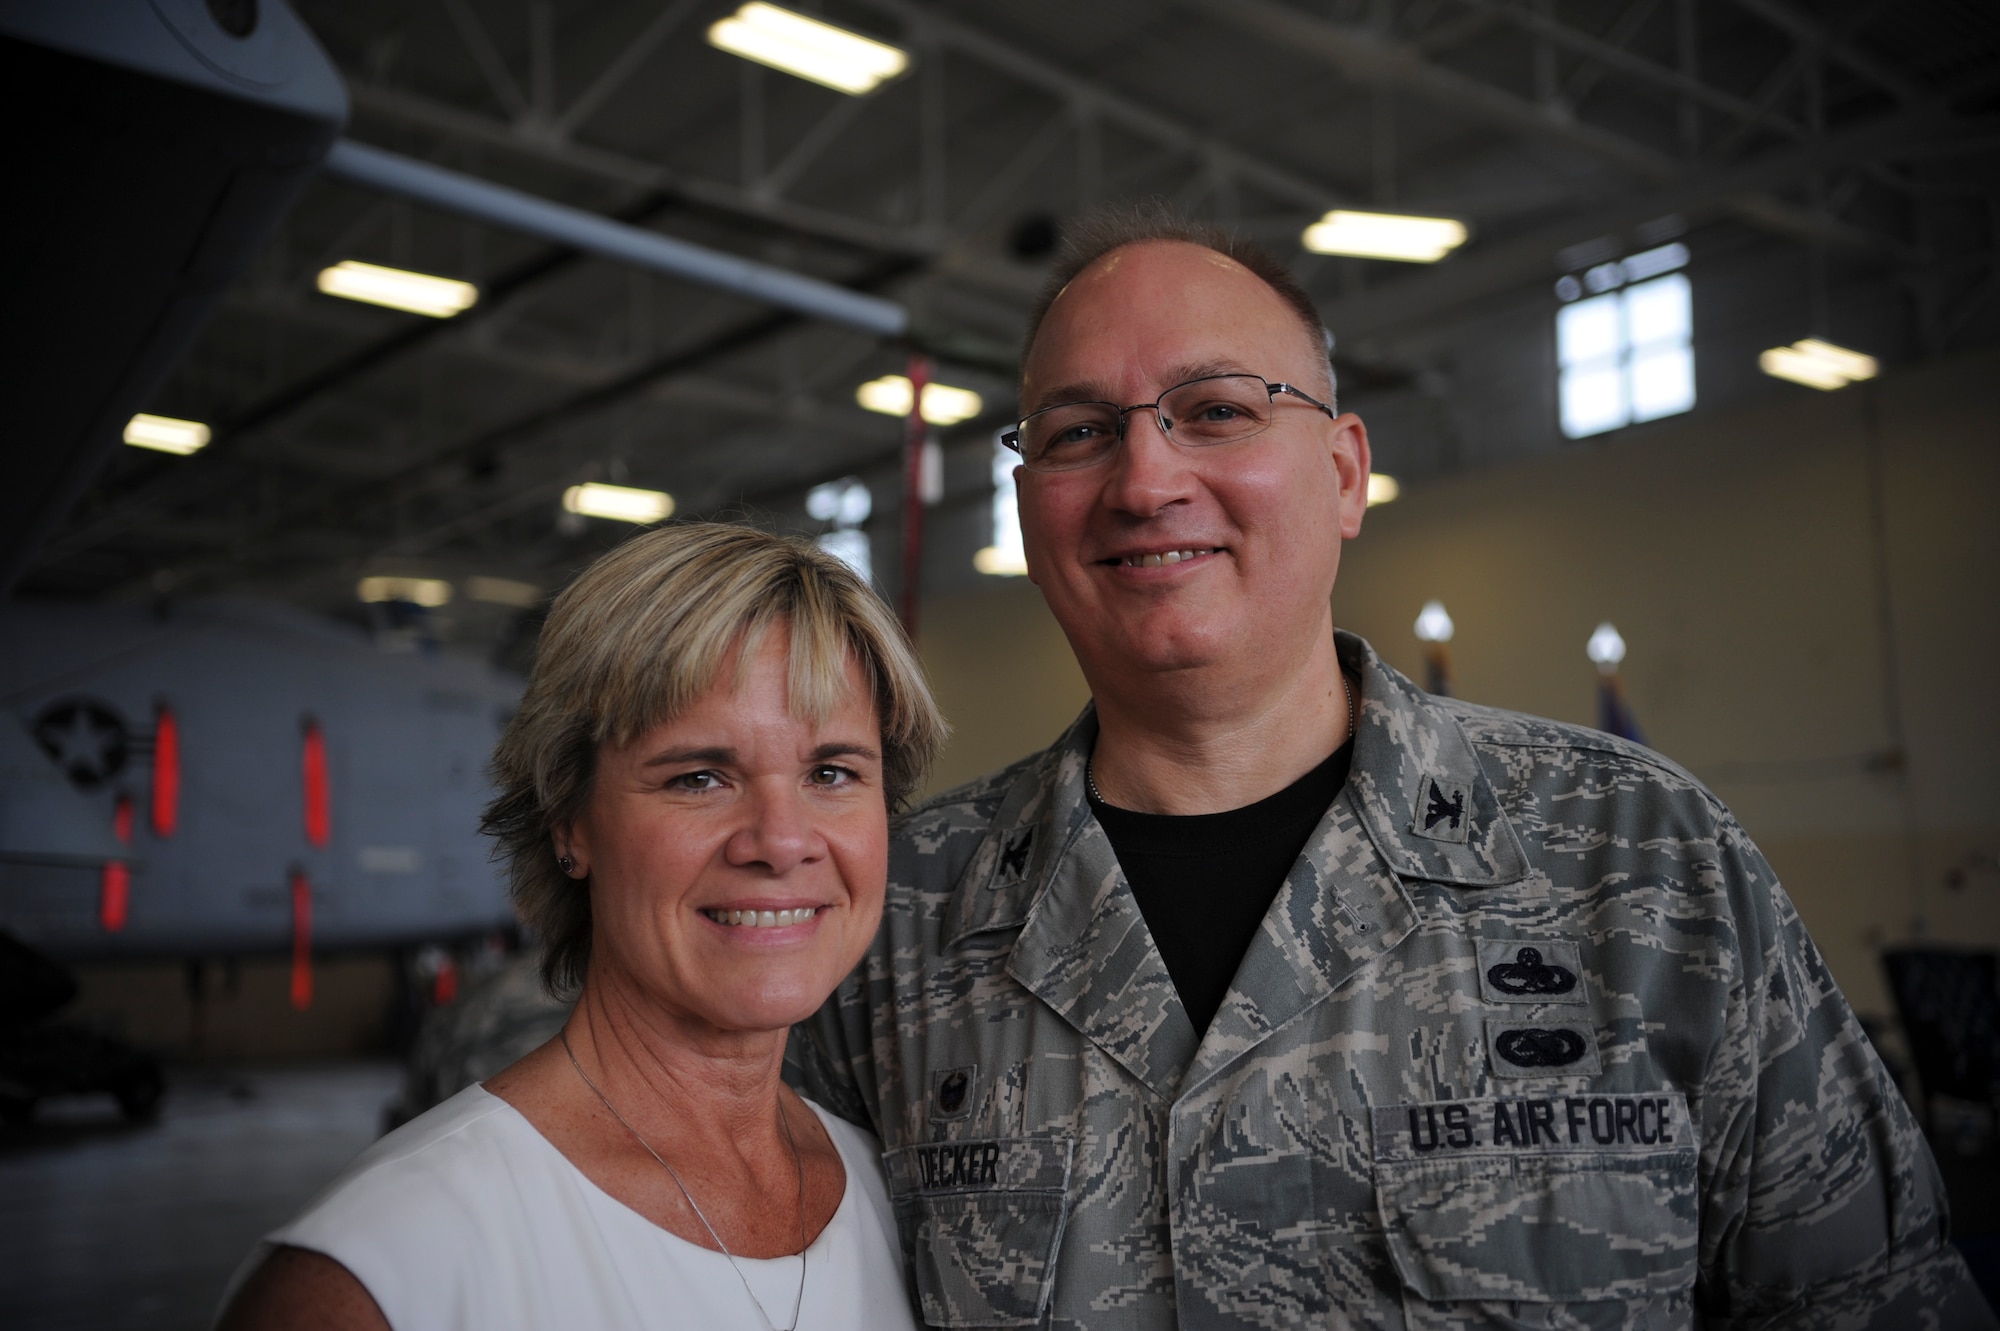 U.S. Air Force Col. Jeffrey Decker, 23d Maintenance Group commander, and his wife Angie, pose for a photo during a recent retirement ceremony Sept. 26, 2014, at Moody Air Force Base, Ga. Although the couple has only been married two years, they grew up together in Kentucky and Angie remembers when Decker would meet her at the bus stop to carry her school books. (U.S. Air Force photo by Andrea Jenkins)
